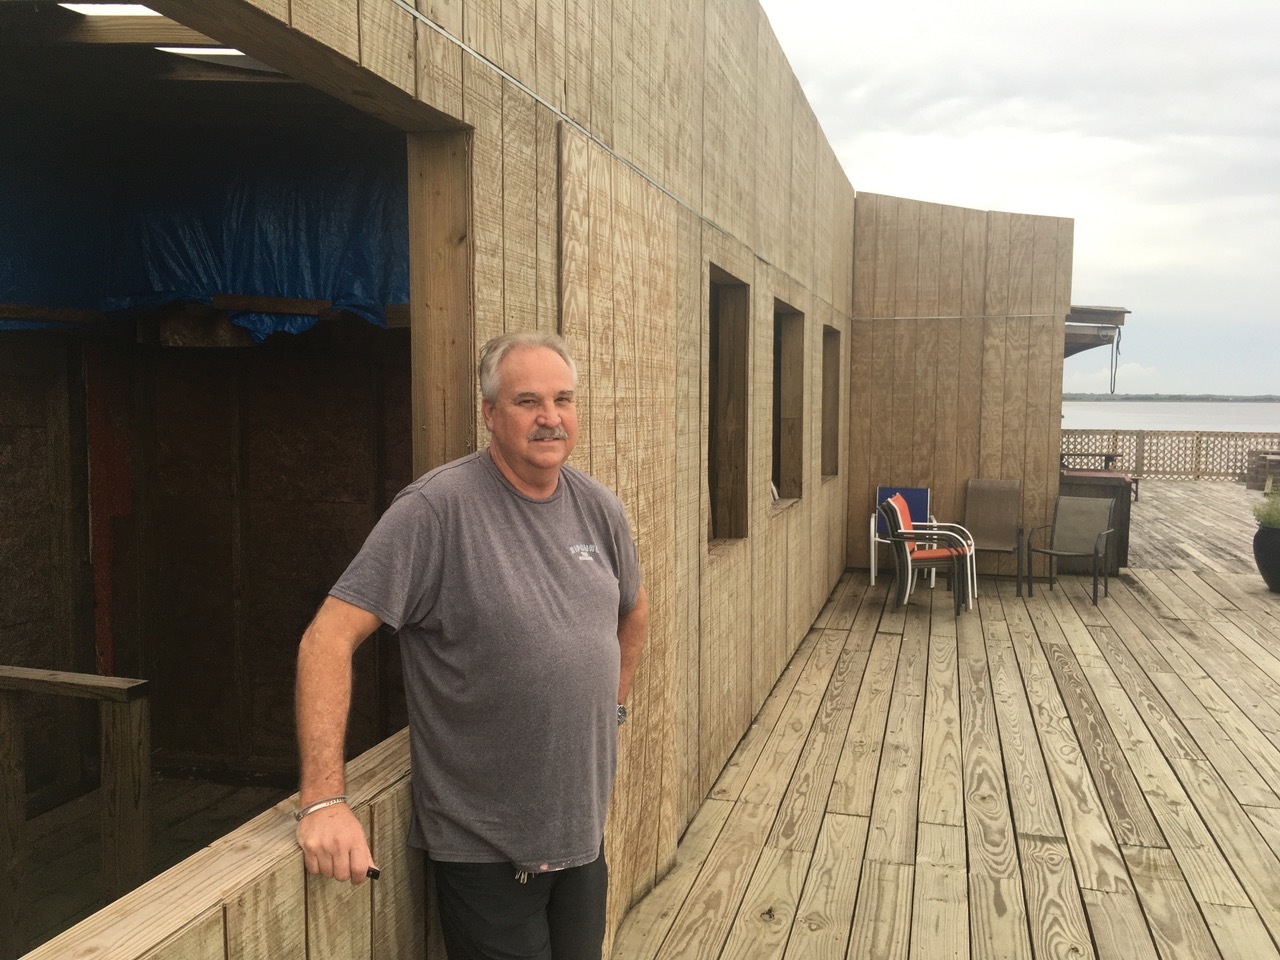 Singleton’s Seafood Shack owner Dean Singleton next to the new wall that separates the deck addition from the restaurant.